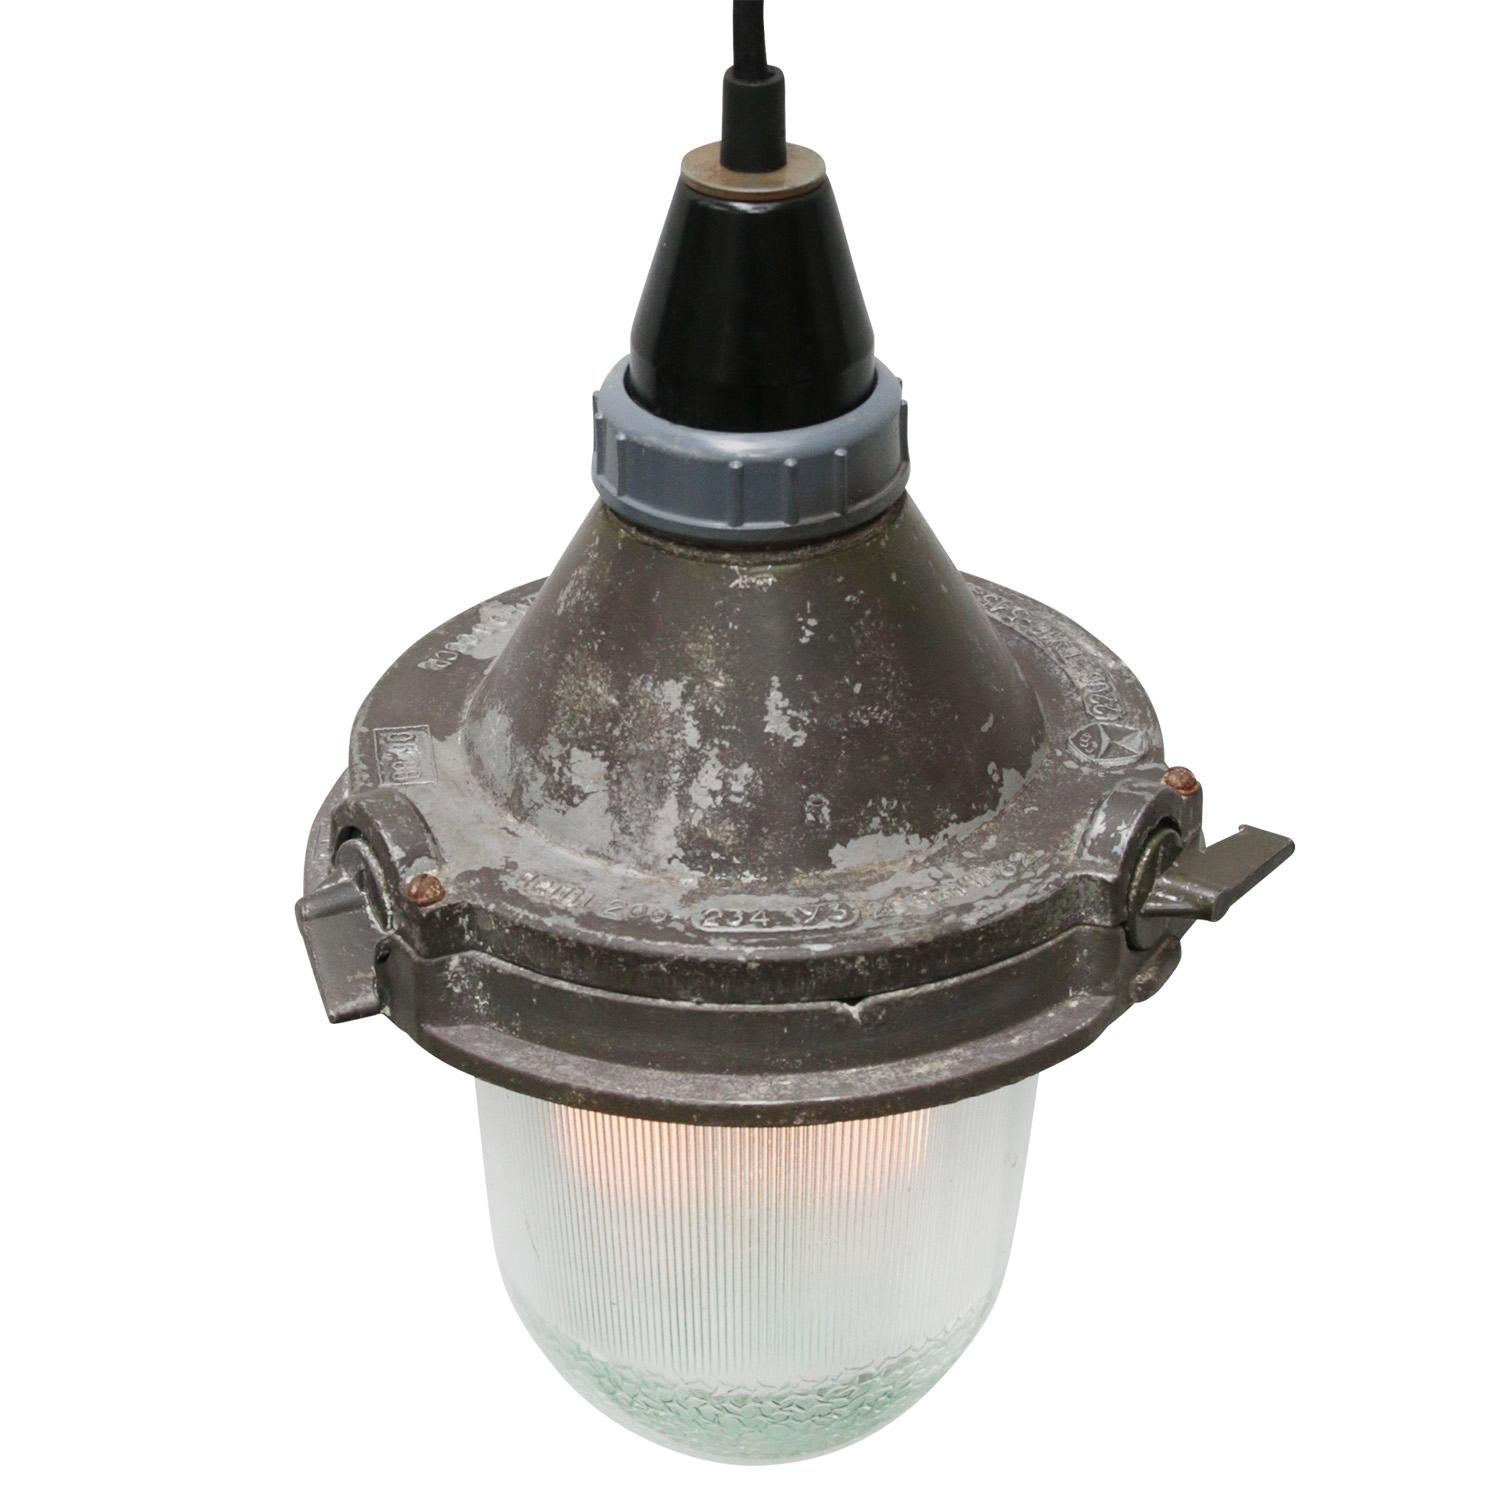 Brown Purple industrial pendant.
Aluminium with Bakelite top.
Clear striped glass. 

Weight: 1.00 kg / 2.2 lb

Priced per individual item. All lamps have been made suitable by international standards for incandescent light bulbs,